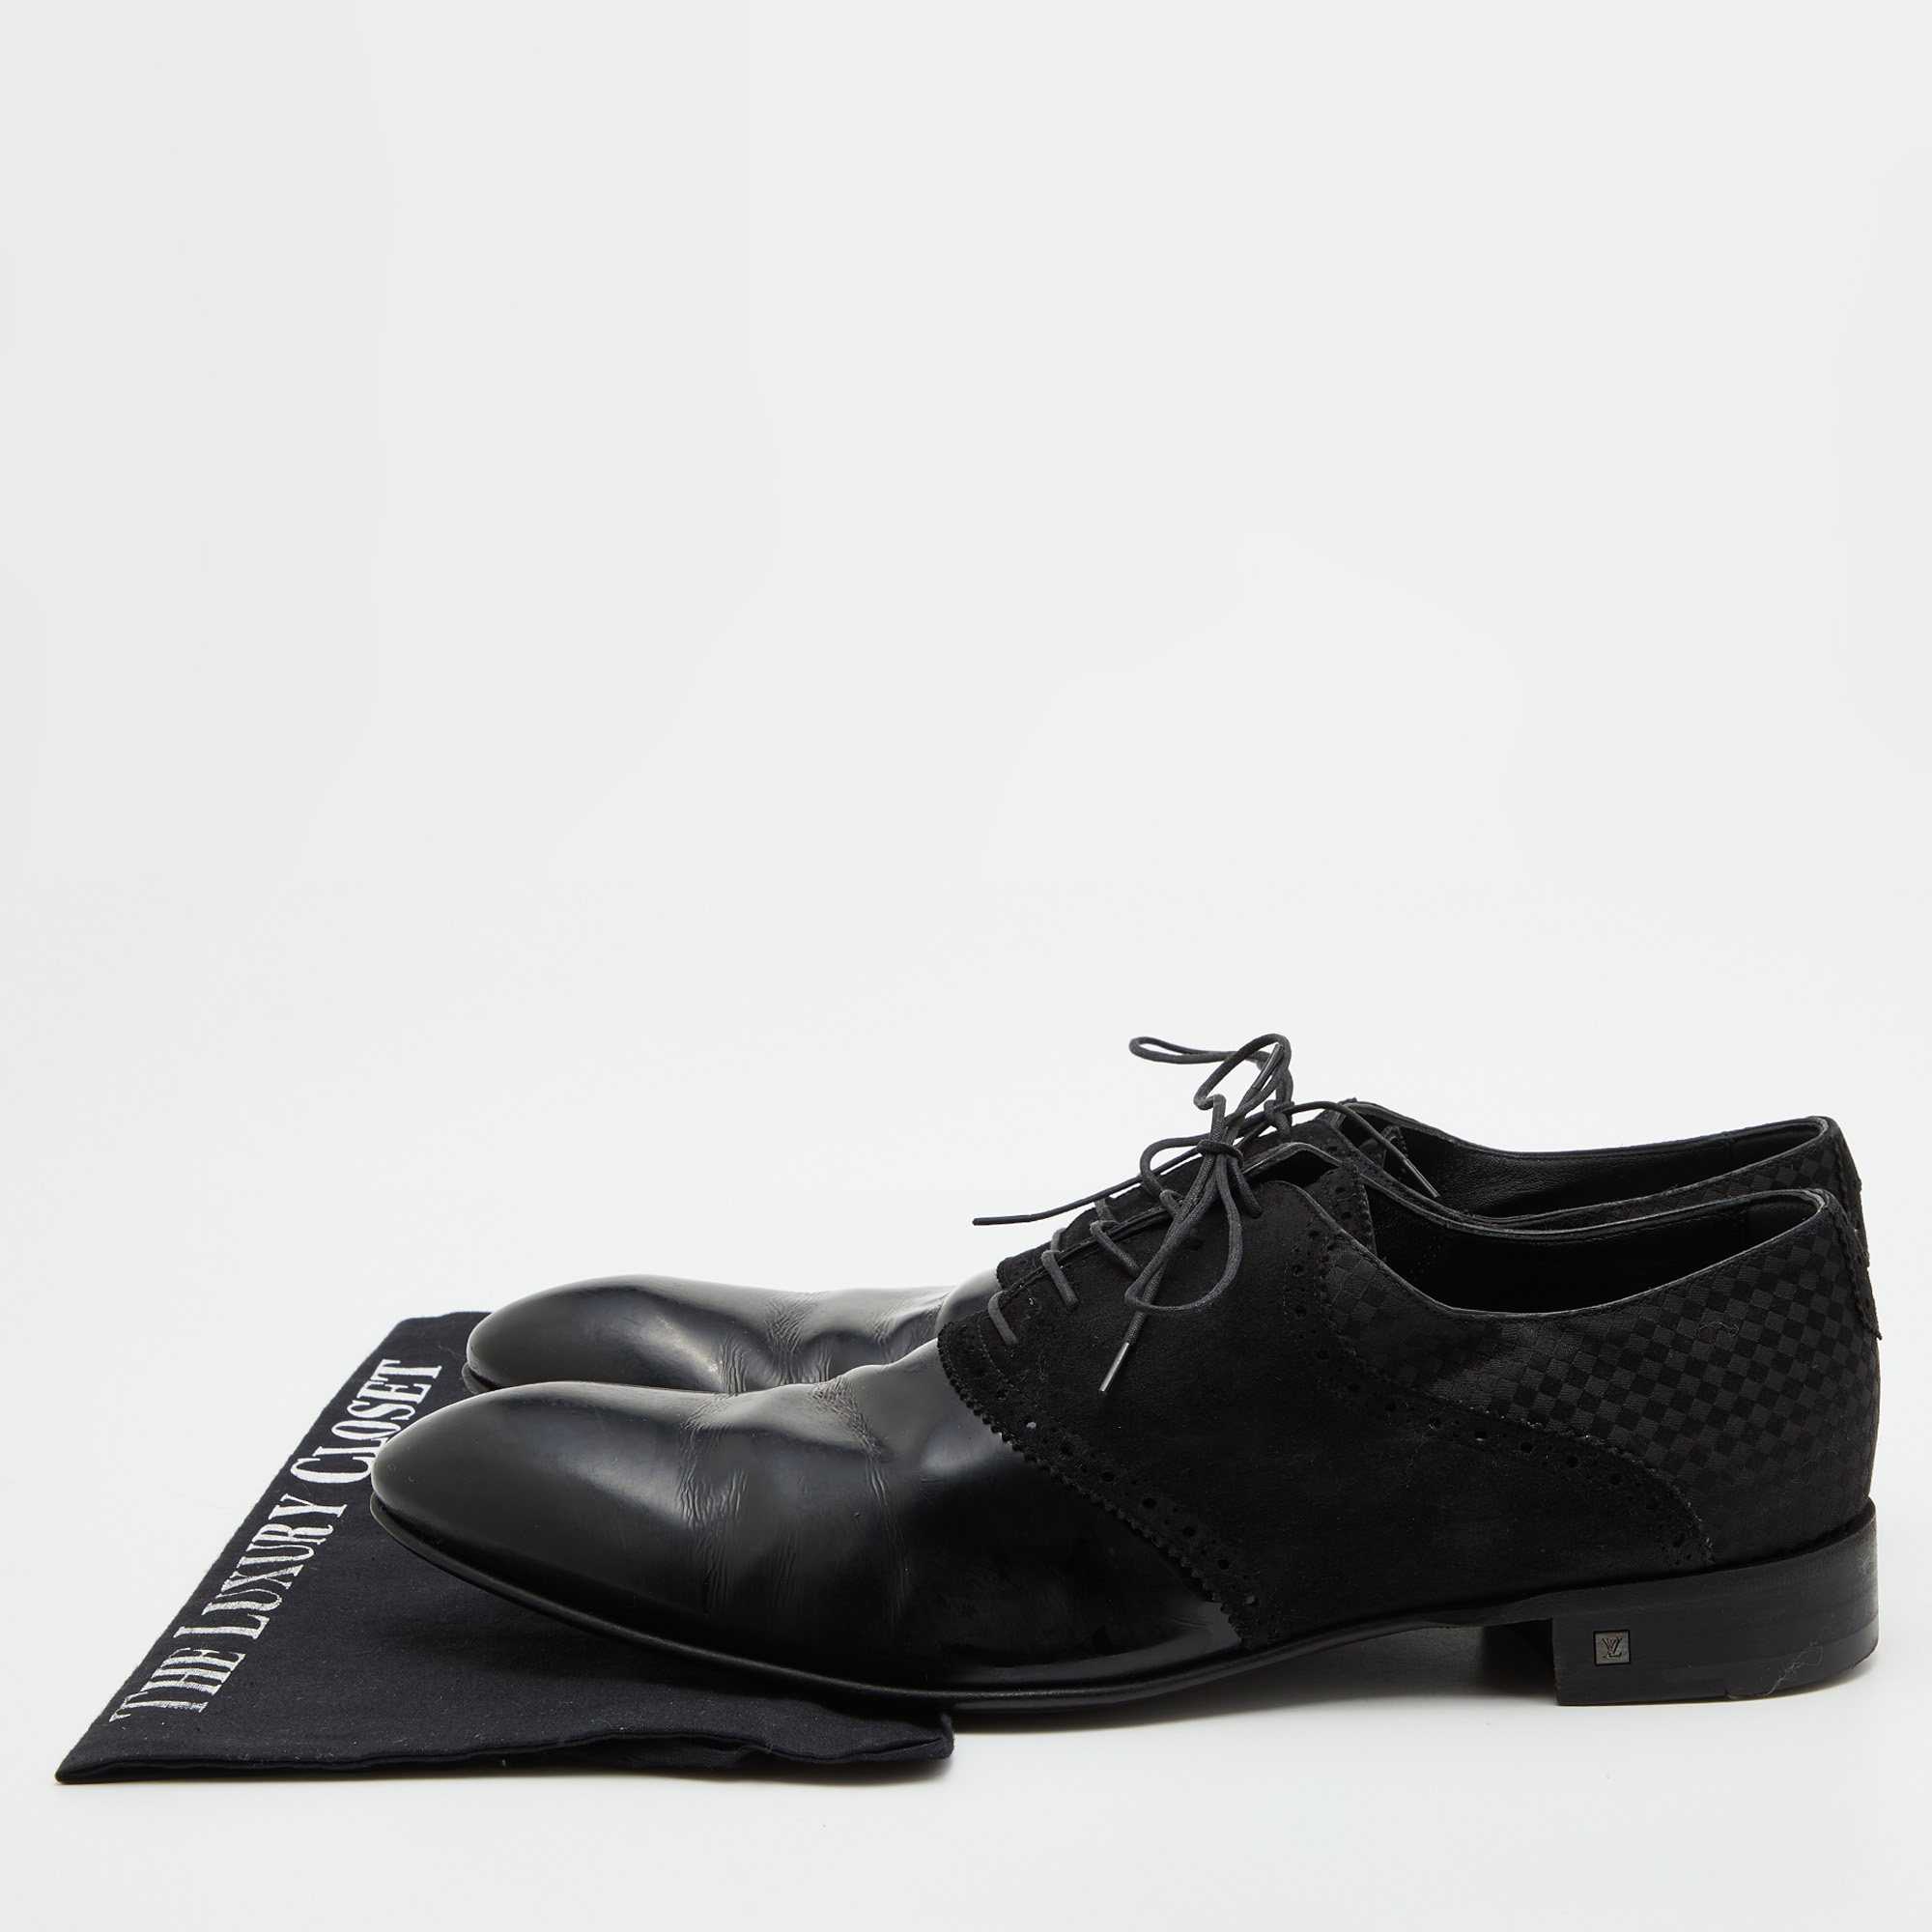 Louis Vuitton Black Damier Fabric, Suede And Leather Lace Up Oxfords Size 43